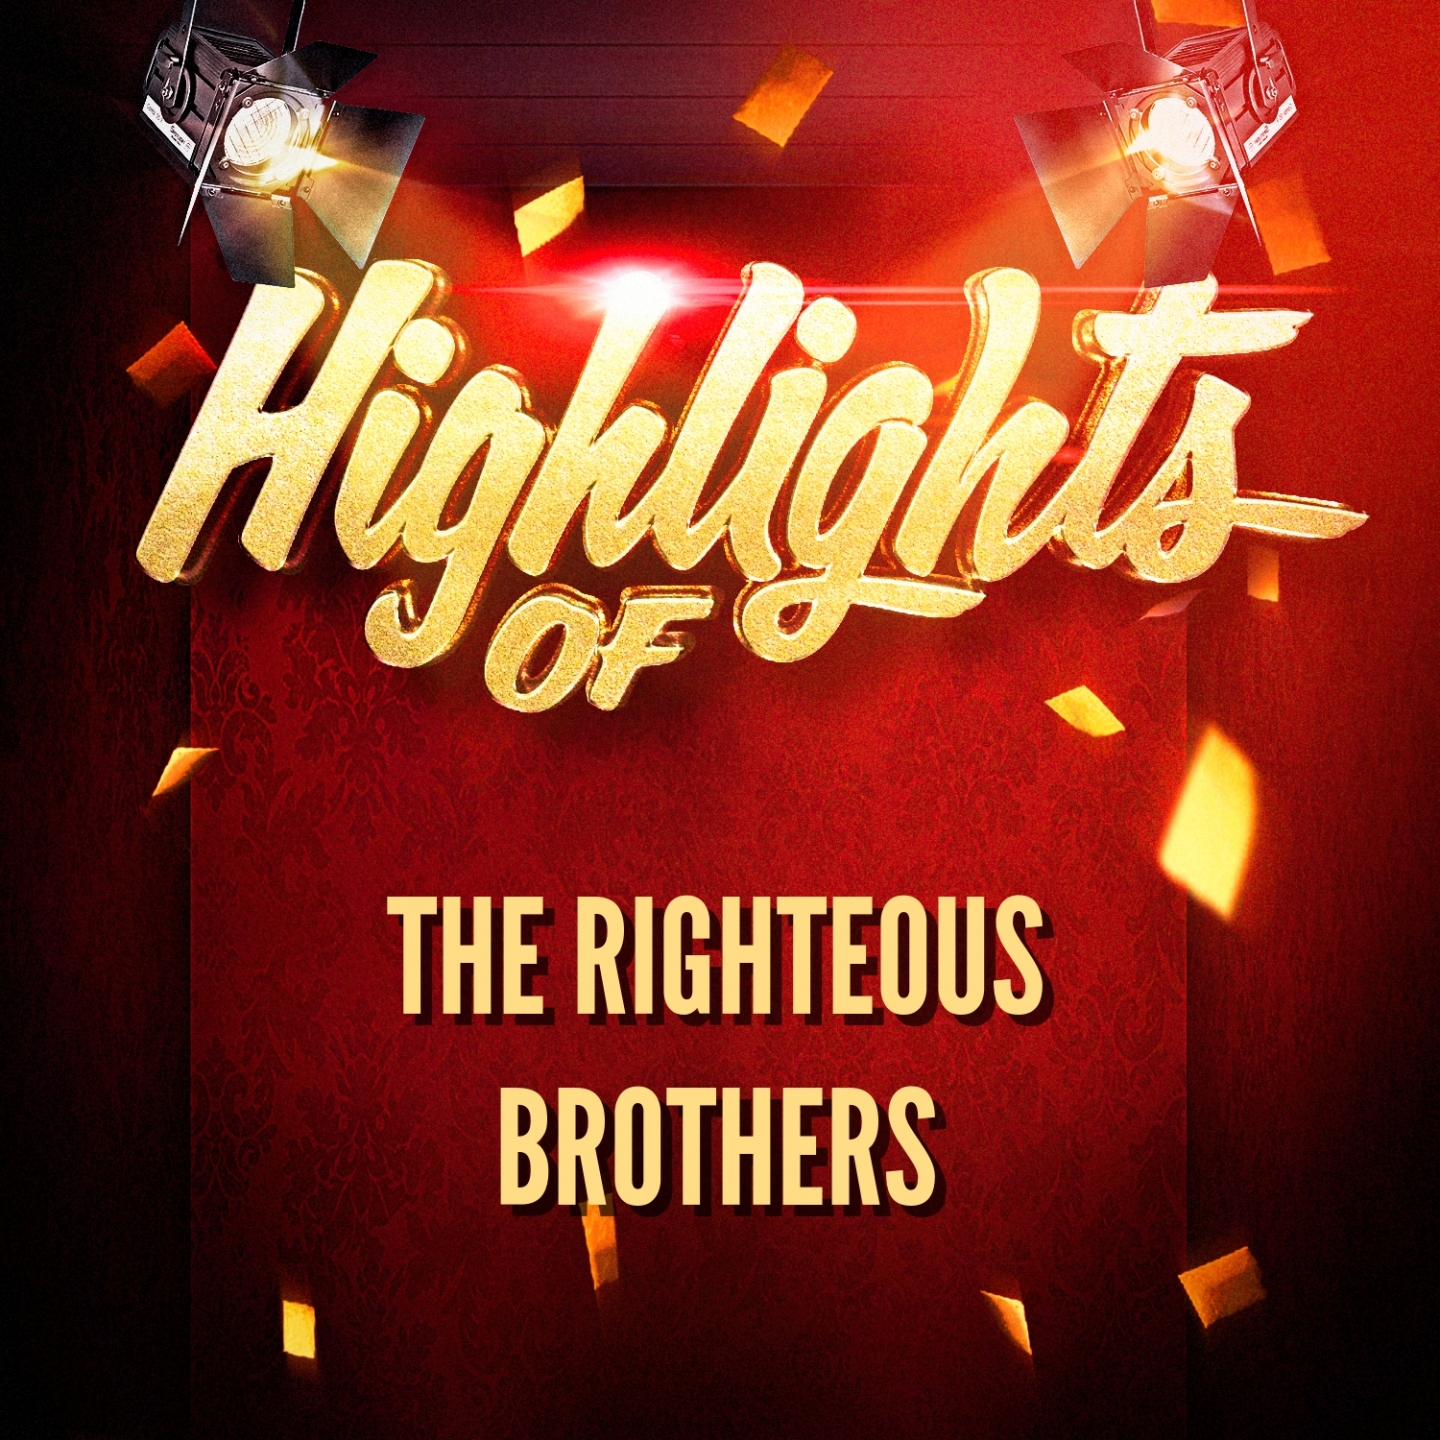 Highlights of The Righteous Brothers